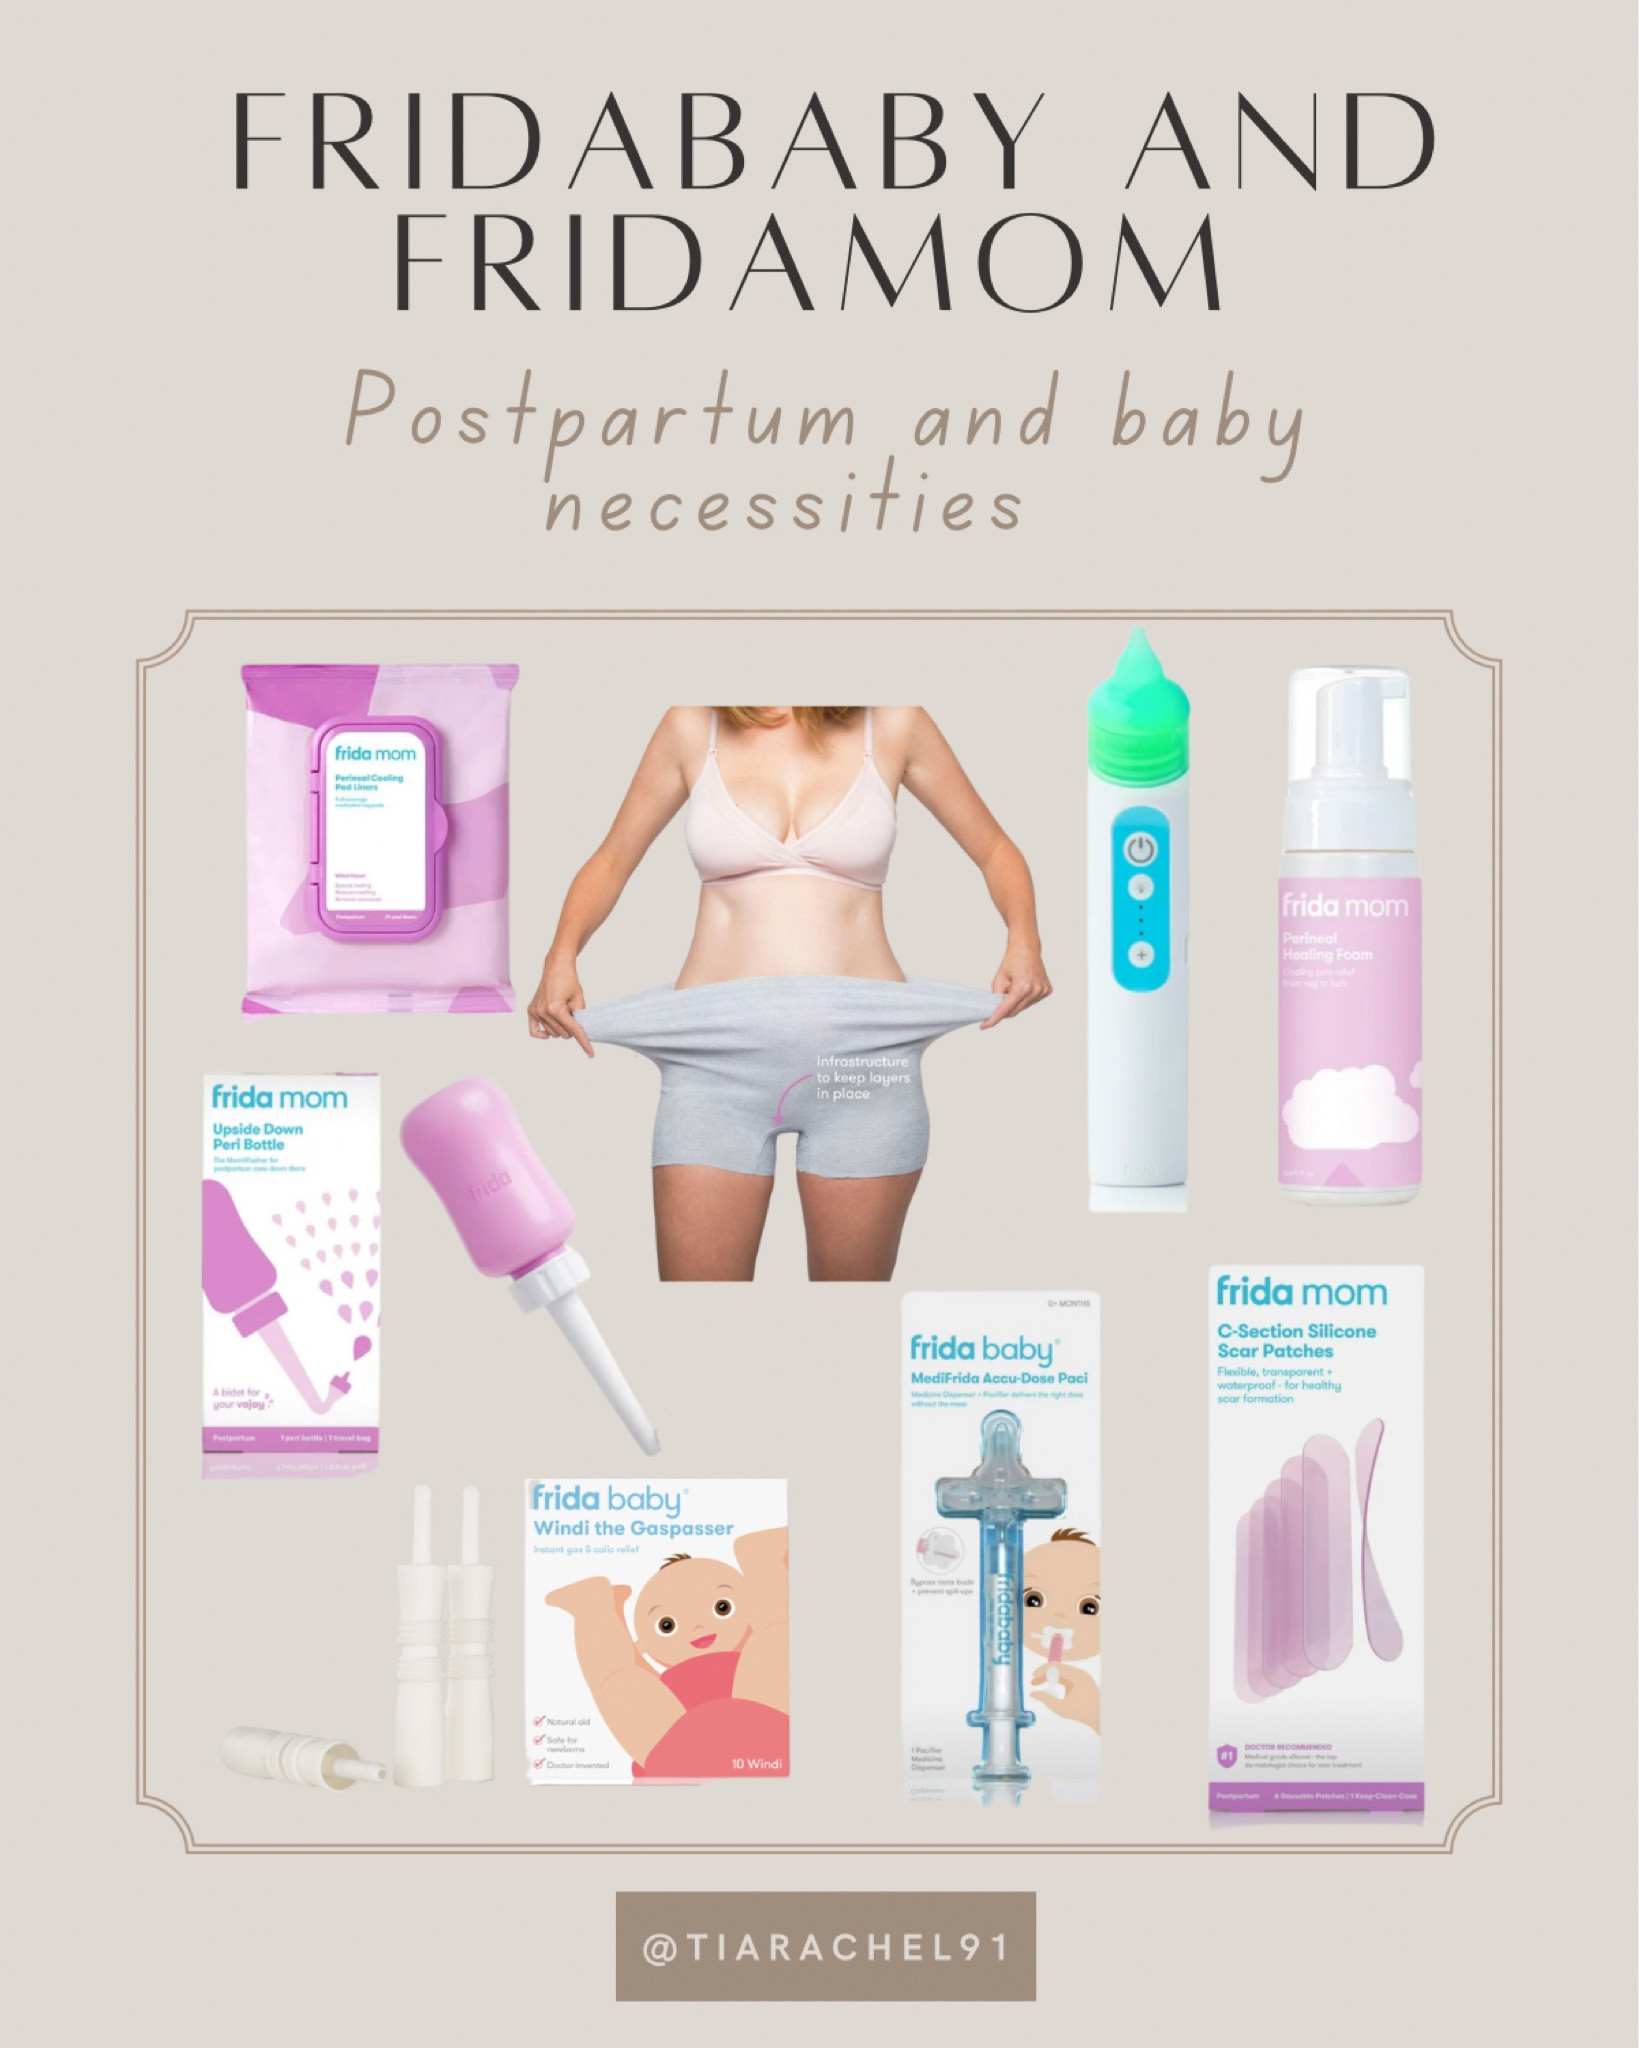 Frida Baby 3-in-1 Nose, Nail + Ear … curated on LTK